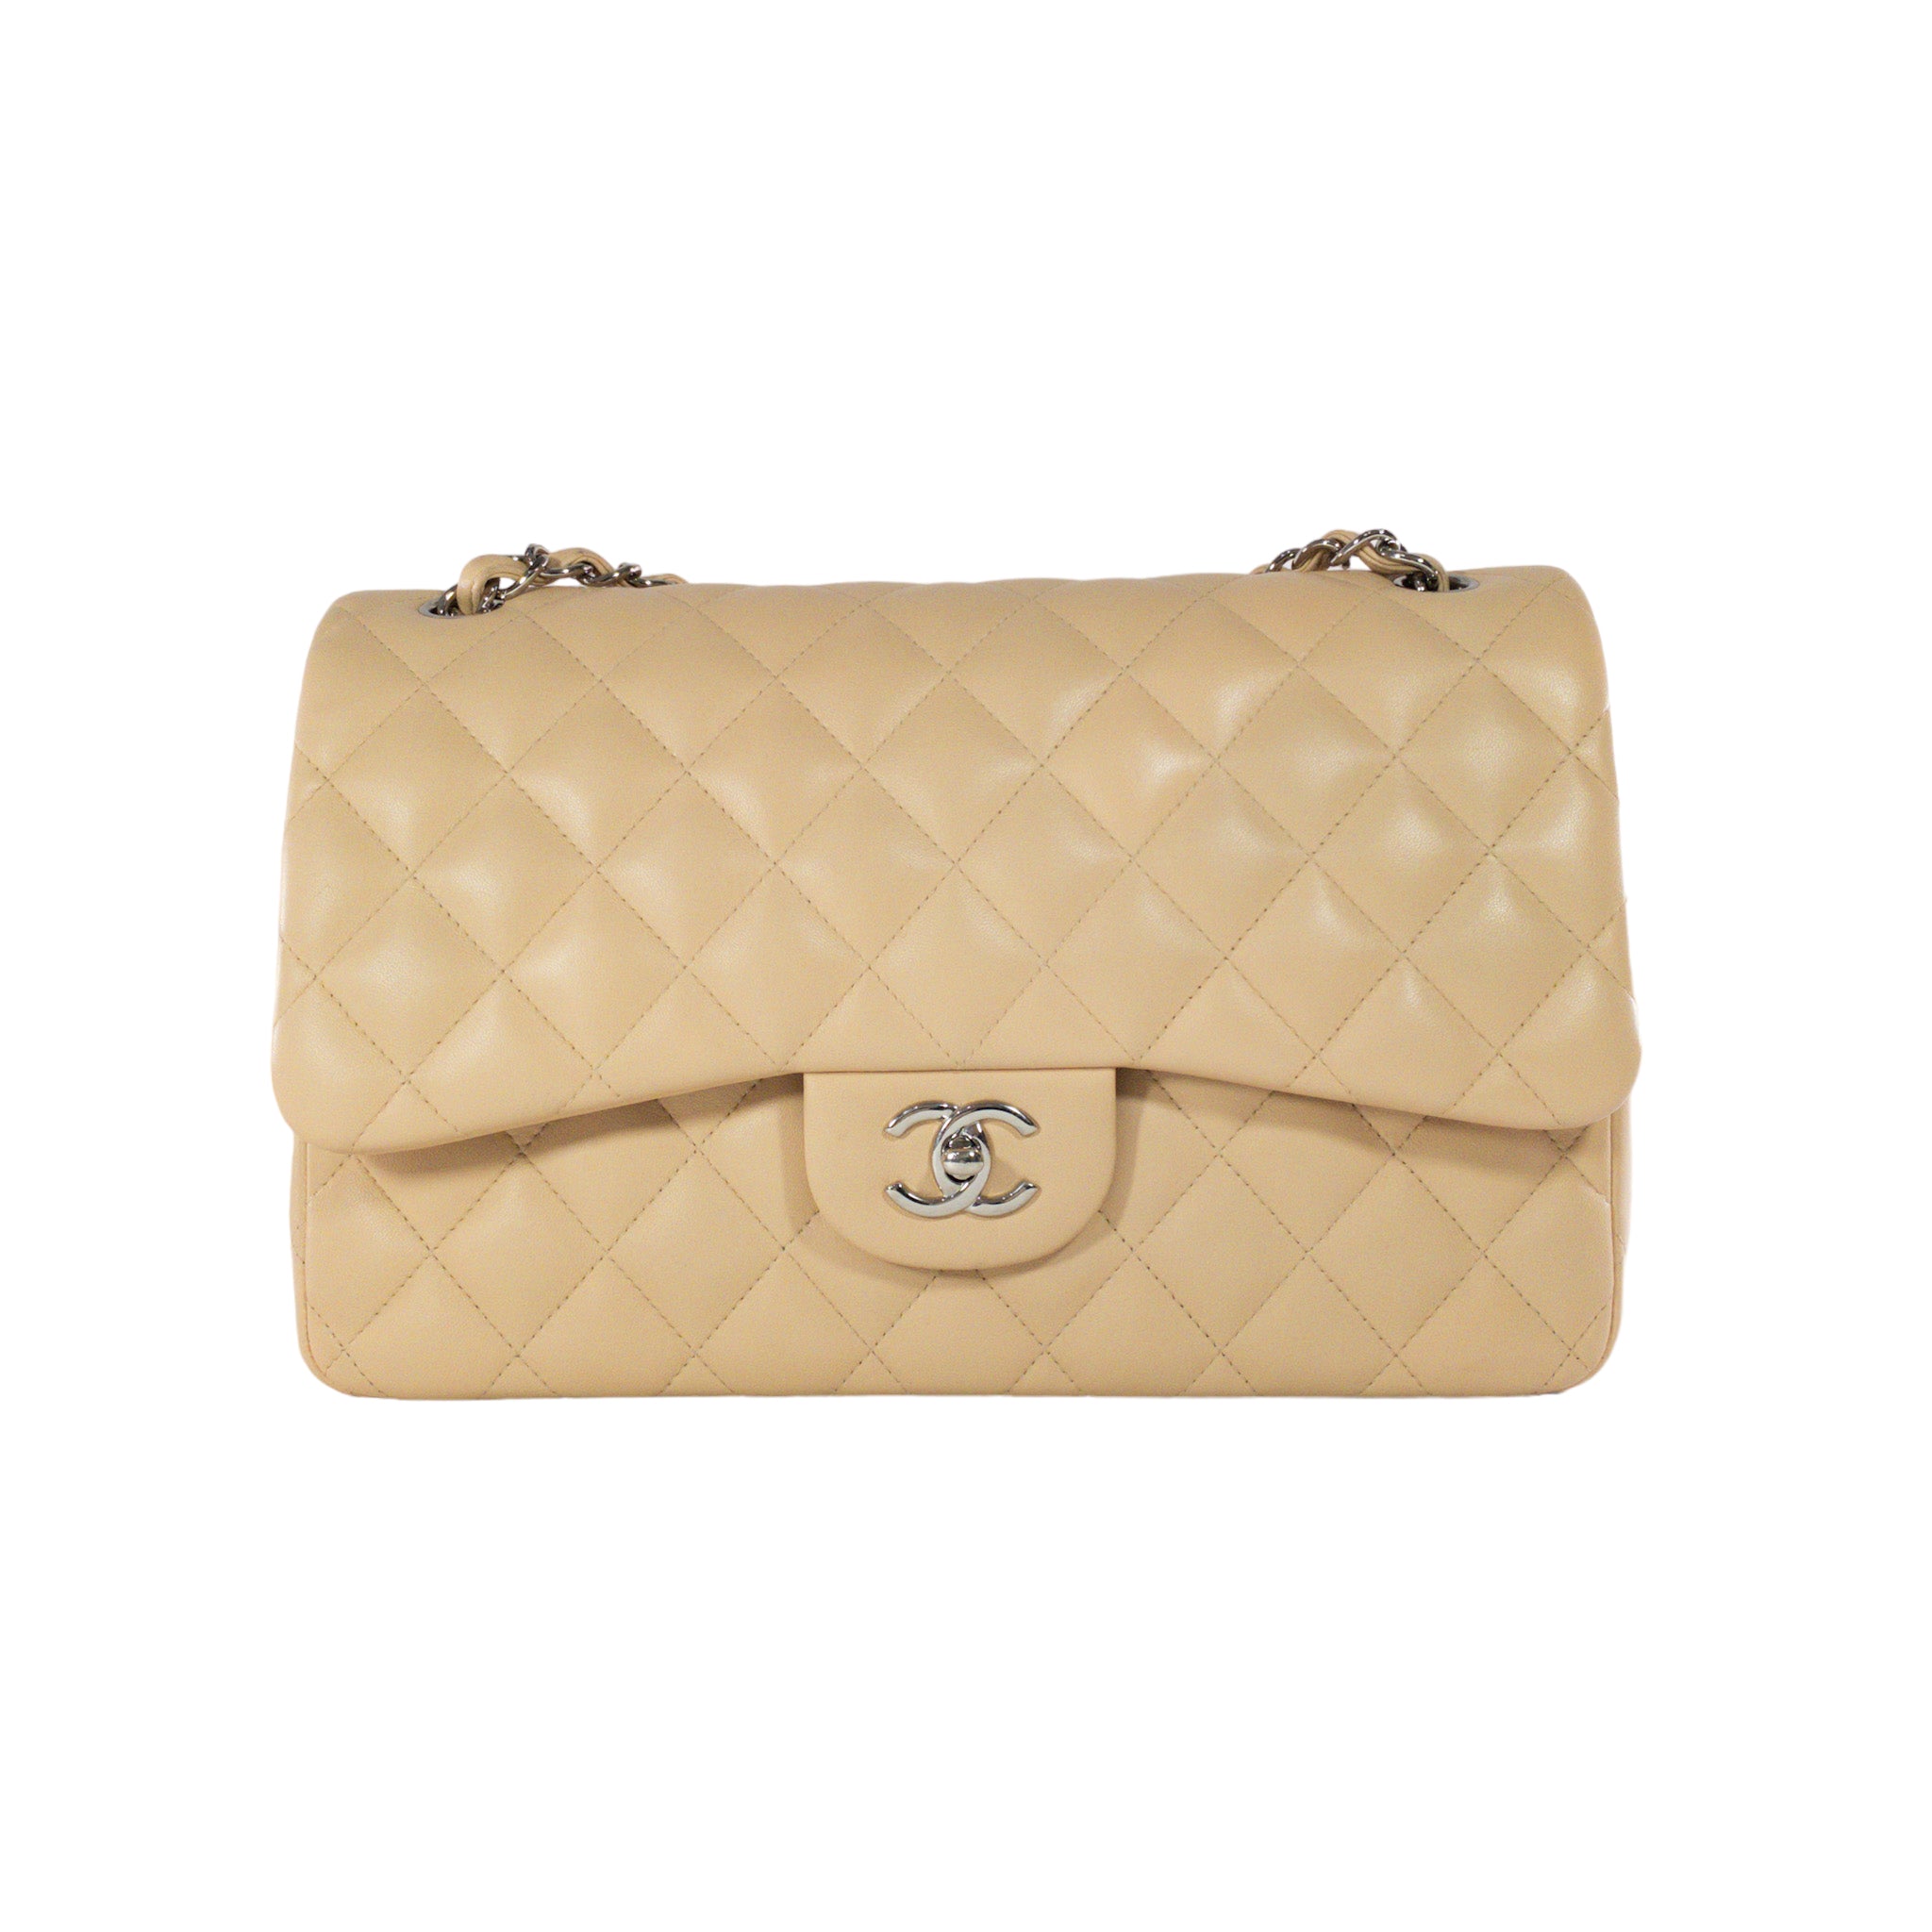 Authentic Chanel Classic Vintage Diana Small Beige Lambskin Flap Bag GHW